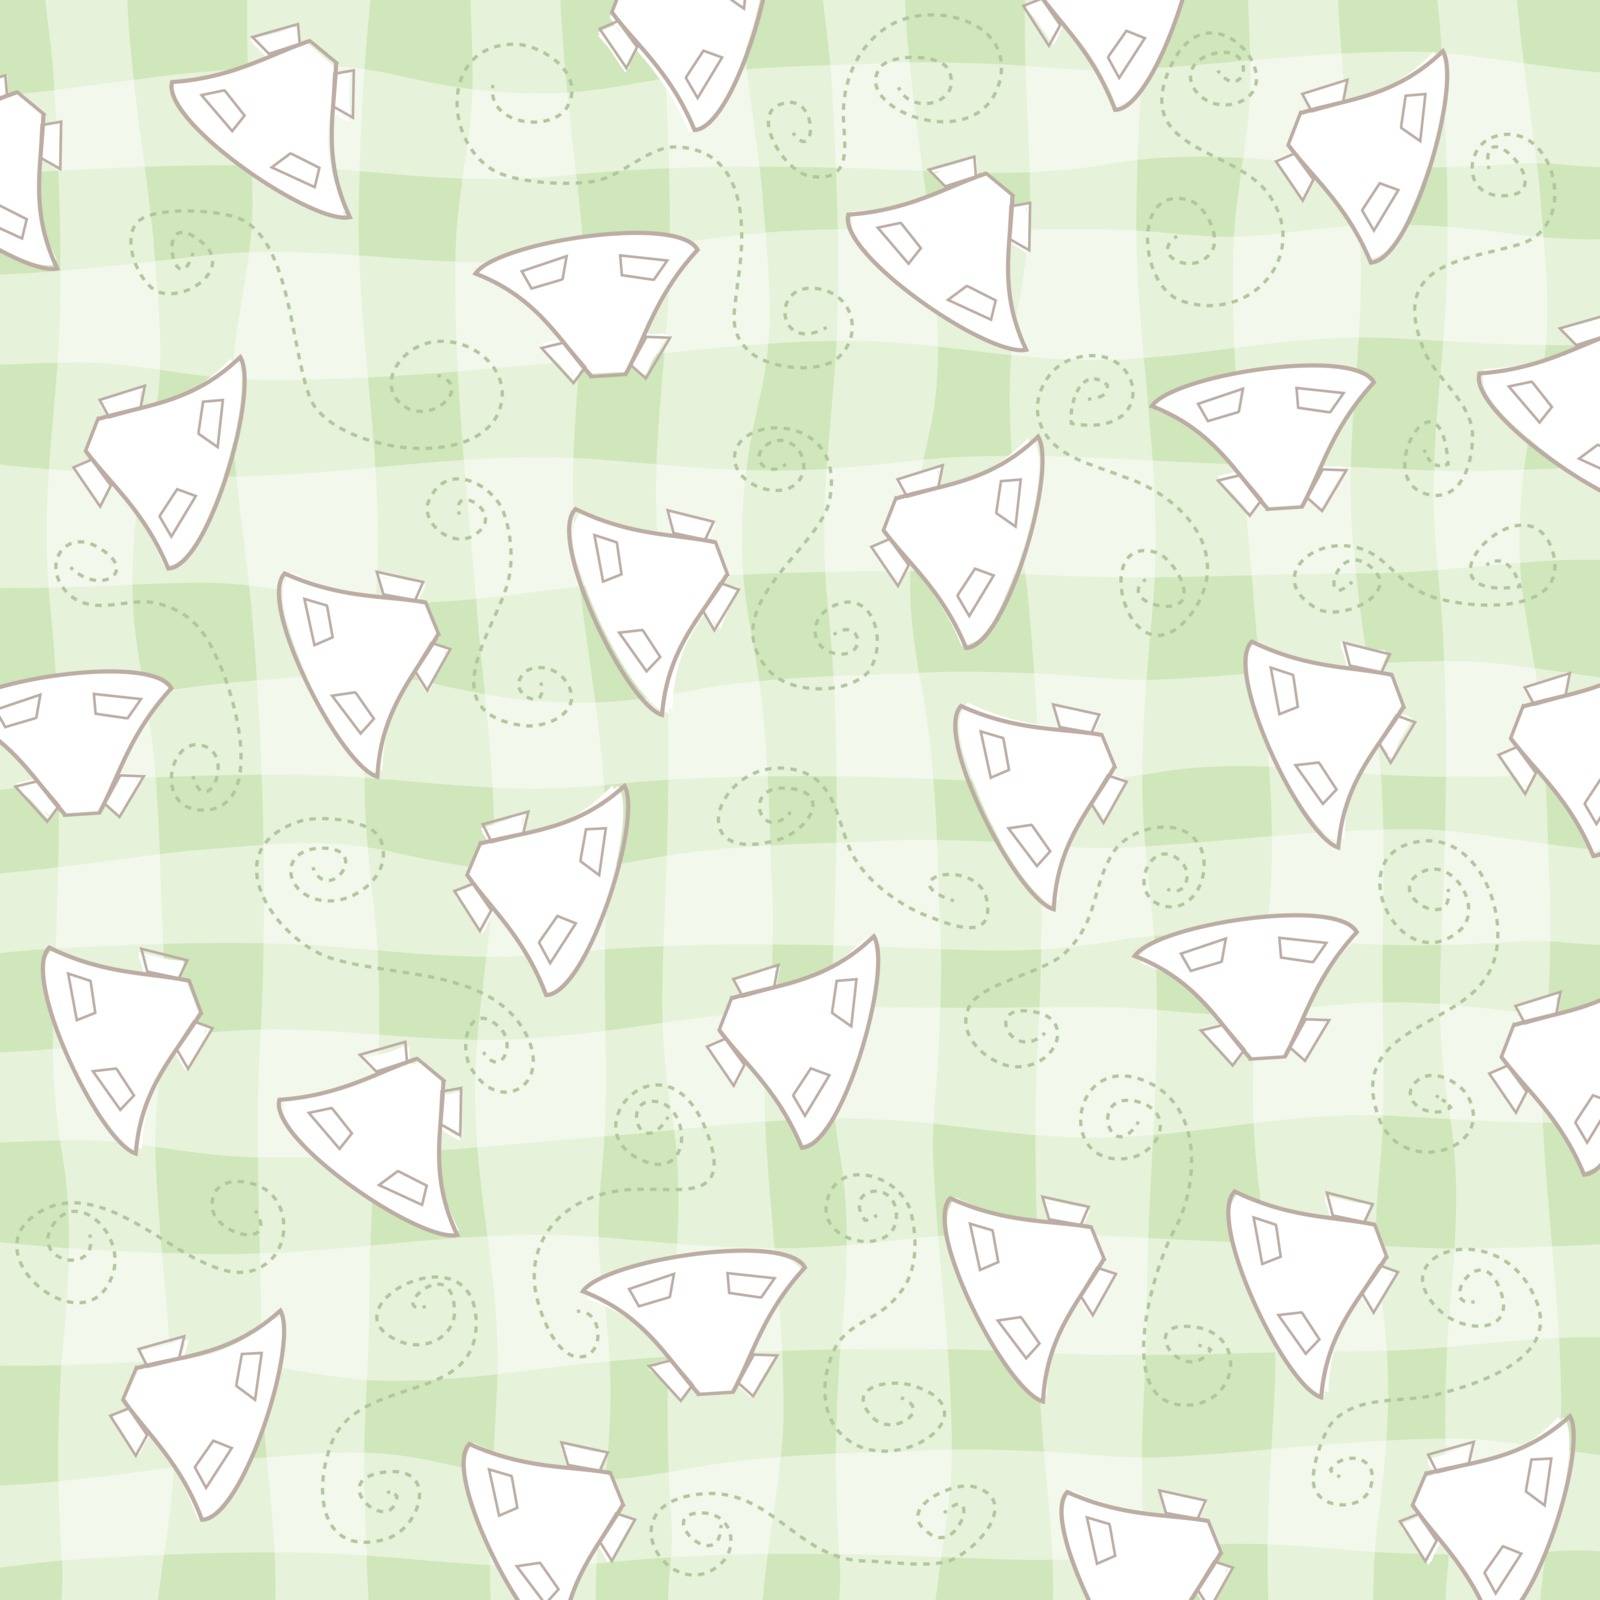 childish seamless pattern with baby dresses, vector illustration